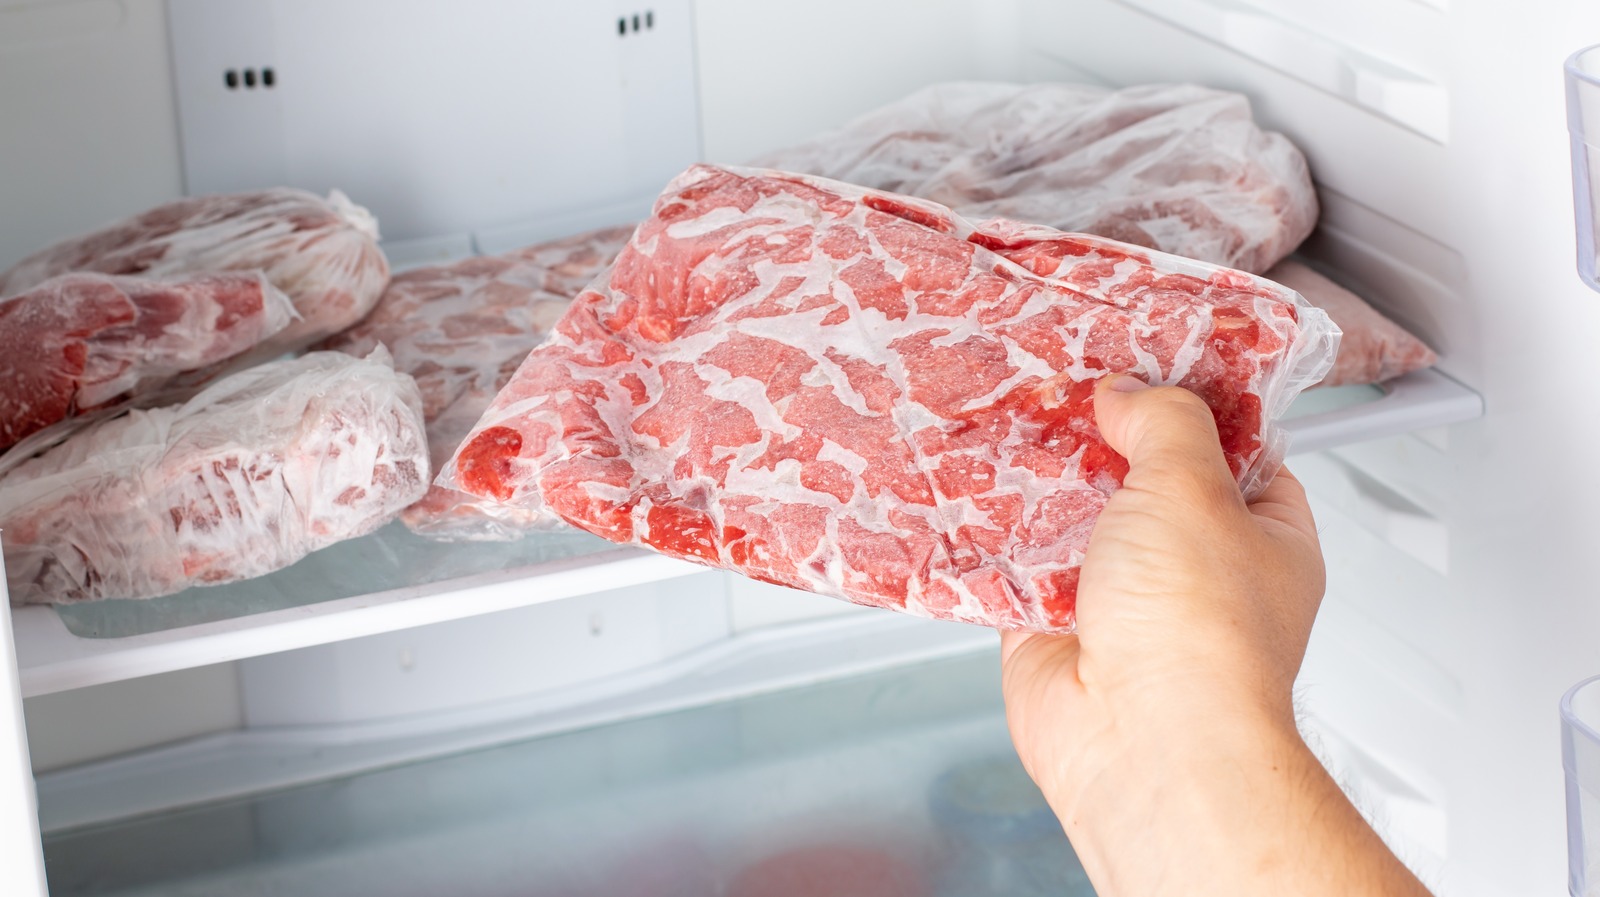 How to Freeze Meat Without Plastic?